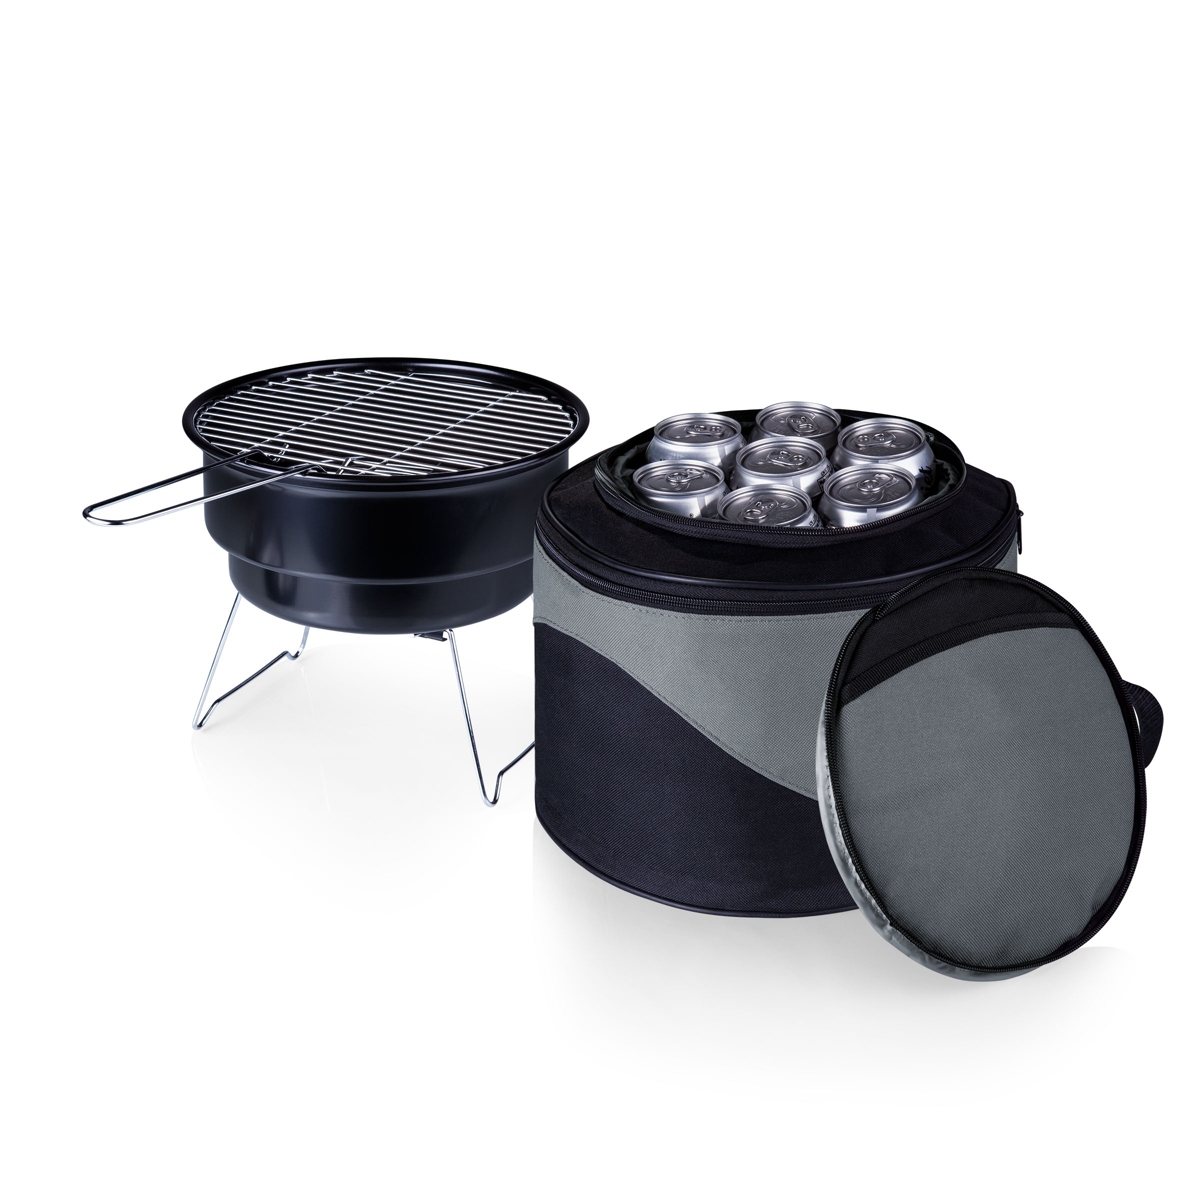 by Picnic Time Caliente Portable Charcoal Grill & Cooler Tote - Black